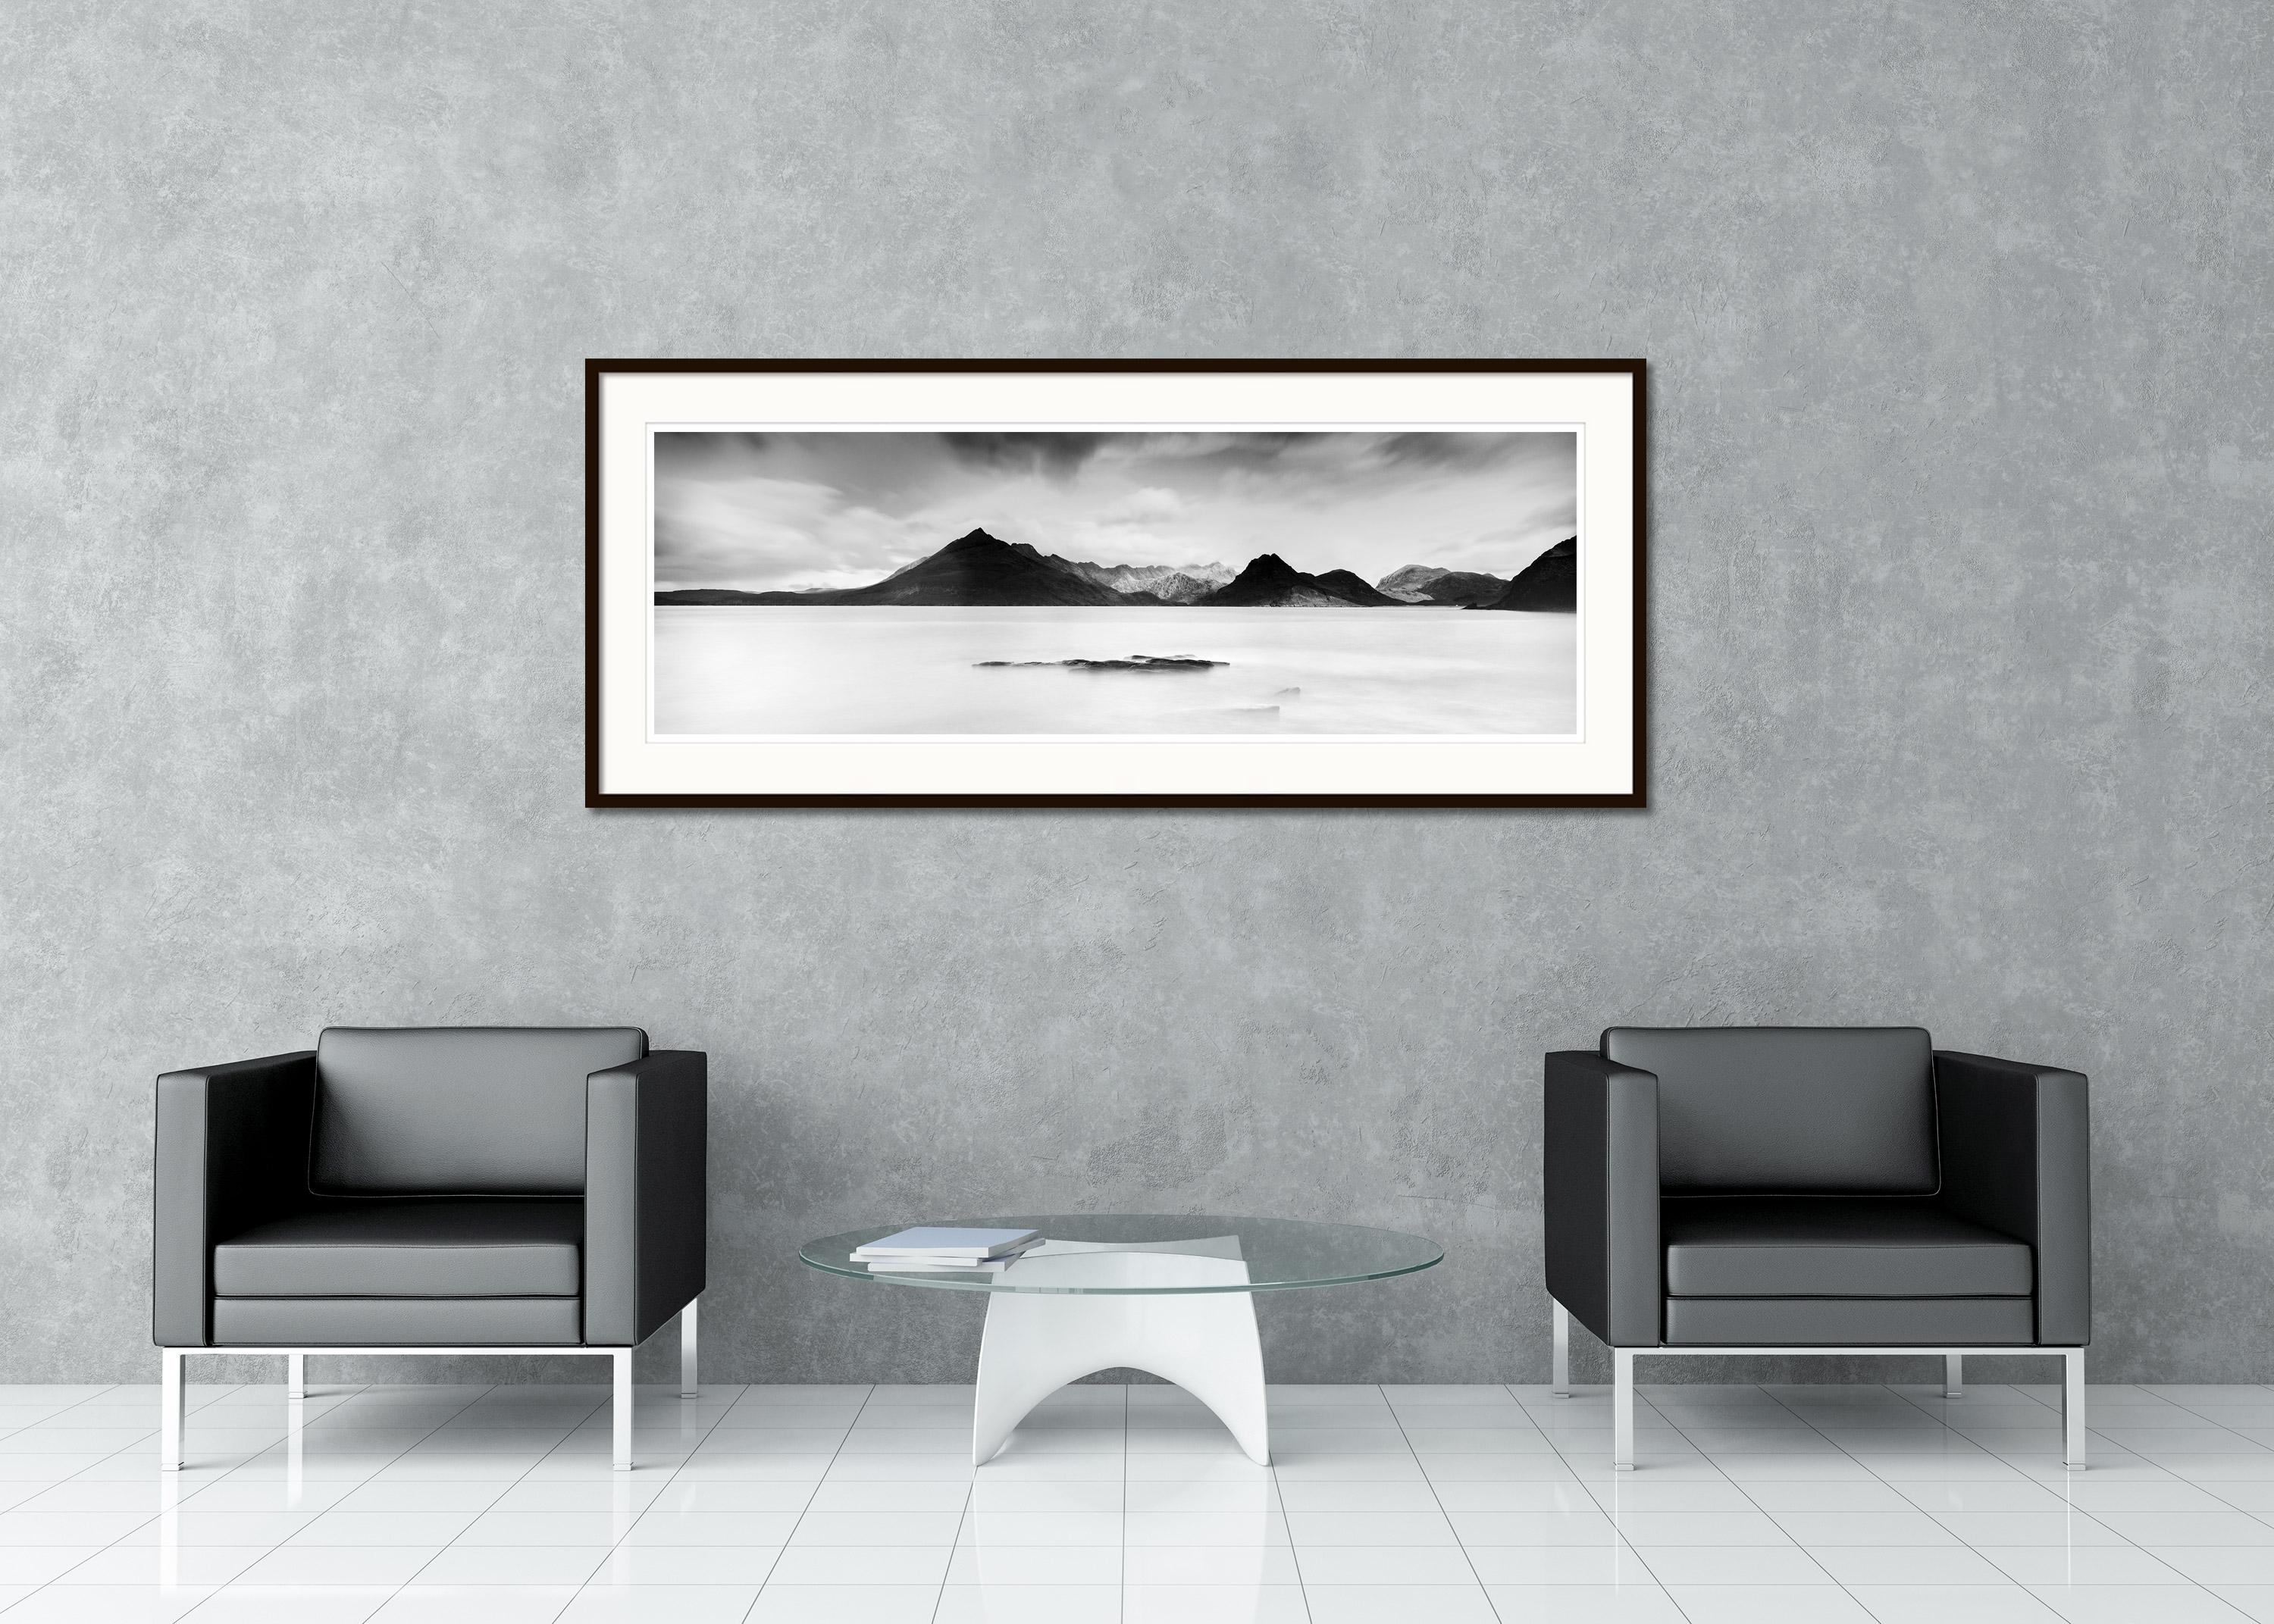 Black and white fine art long exposure waterscape - landscape photography. Wild Atlantic coast of Scotland with the big mountains in the background. Archival pigment ink print, edition of 20. Signed, titled, dated and numbered by artist. Certificate